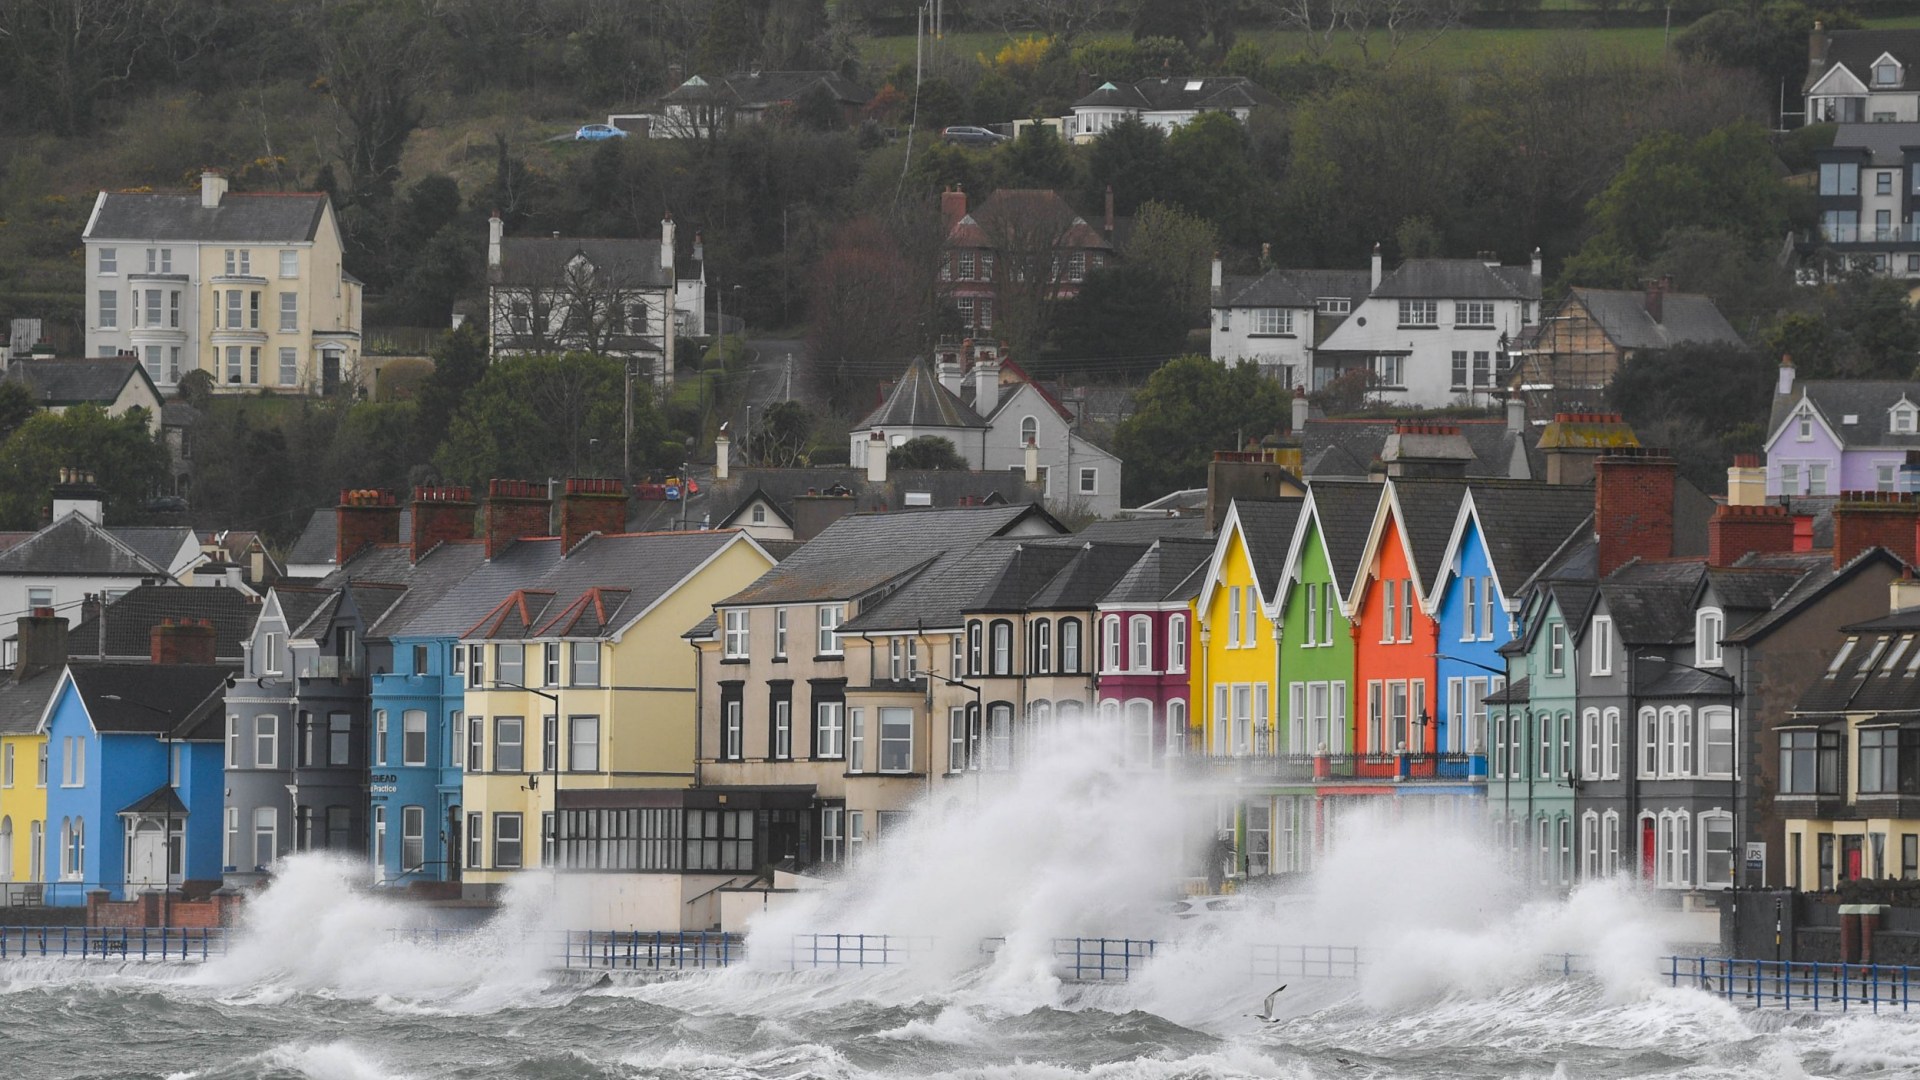 Storm Kathleen batters Ireland with 112kph gusts leaving thousands without power as 5 counties due fresh weather blast [Video]